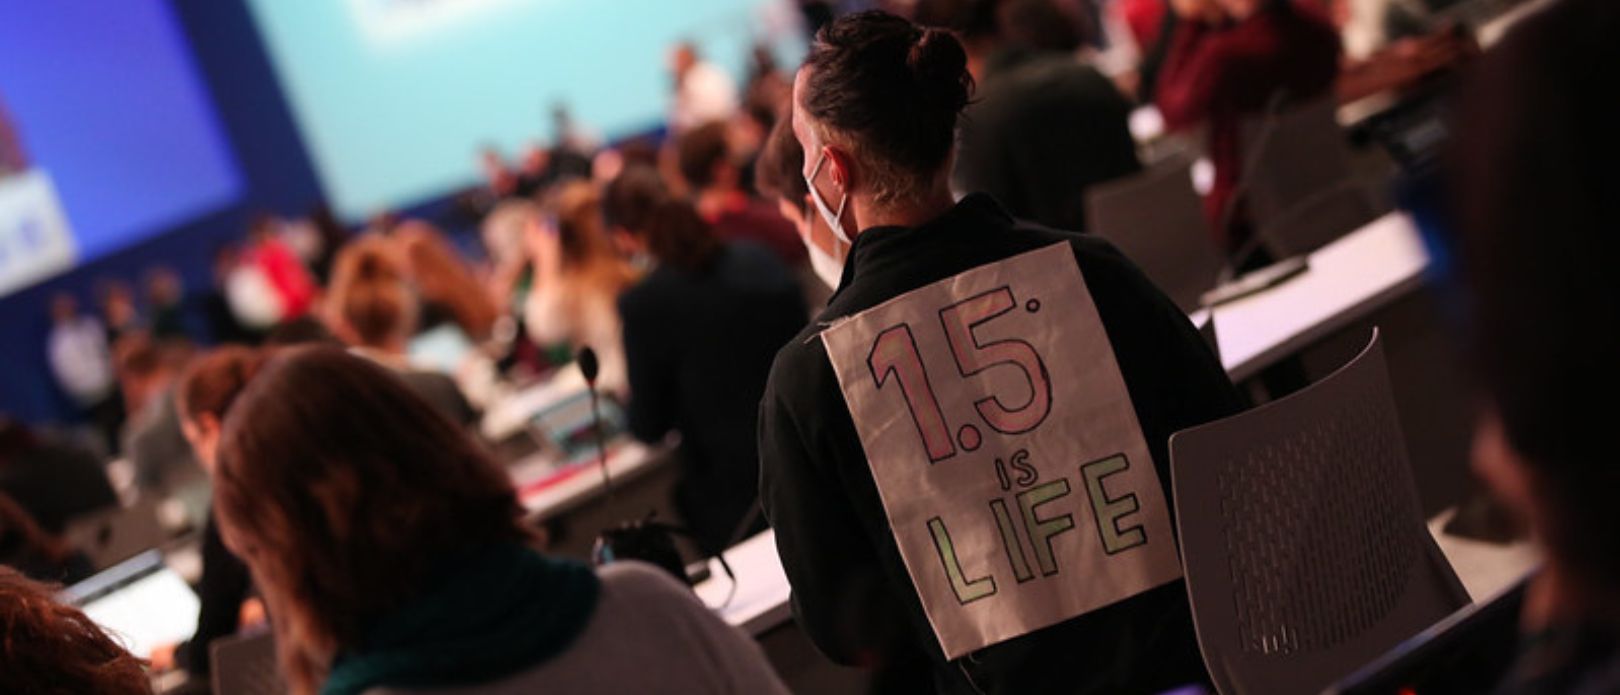 View from behind of an audience at the United Nations Climate Change Conference. A spectator wears a sign reading "1.5 is Life". 